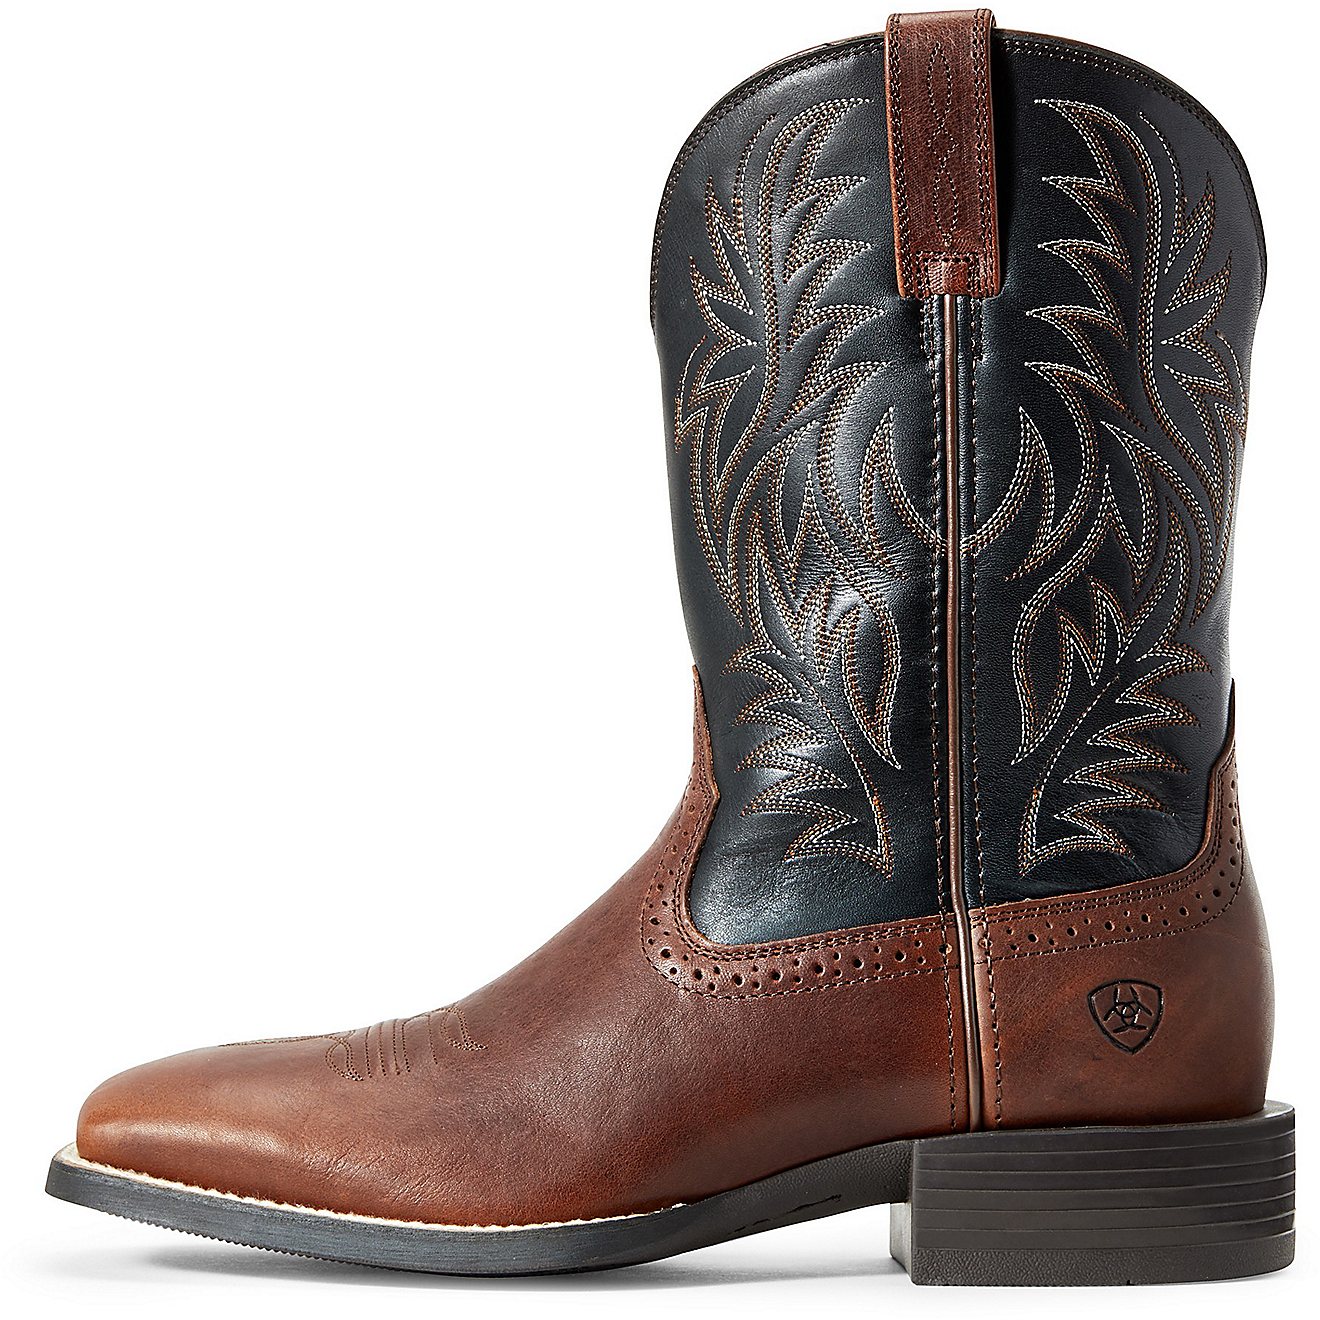 Ariat Men's Sport Wide Square Toe Western Boots                                                                                  - view number 2